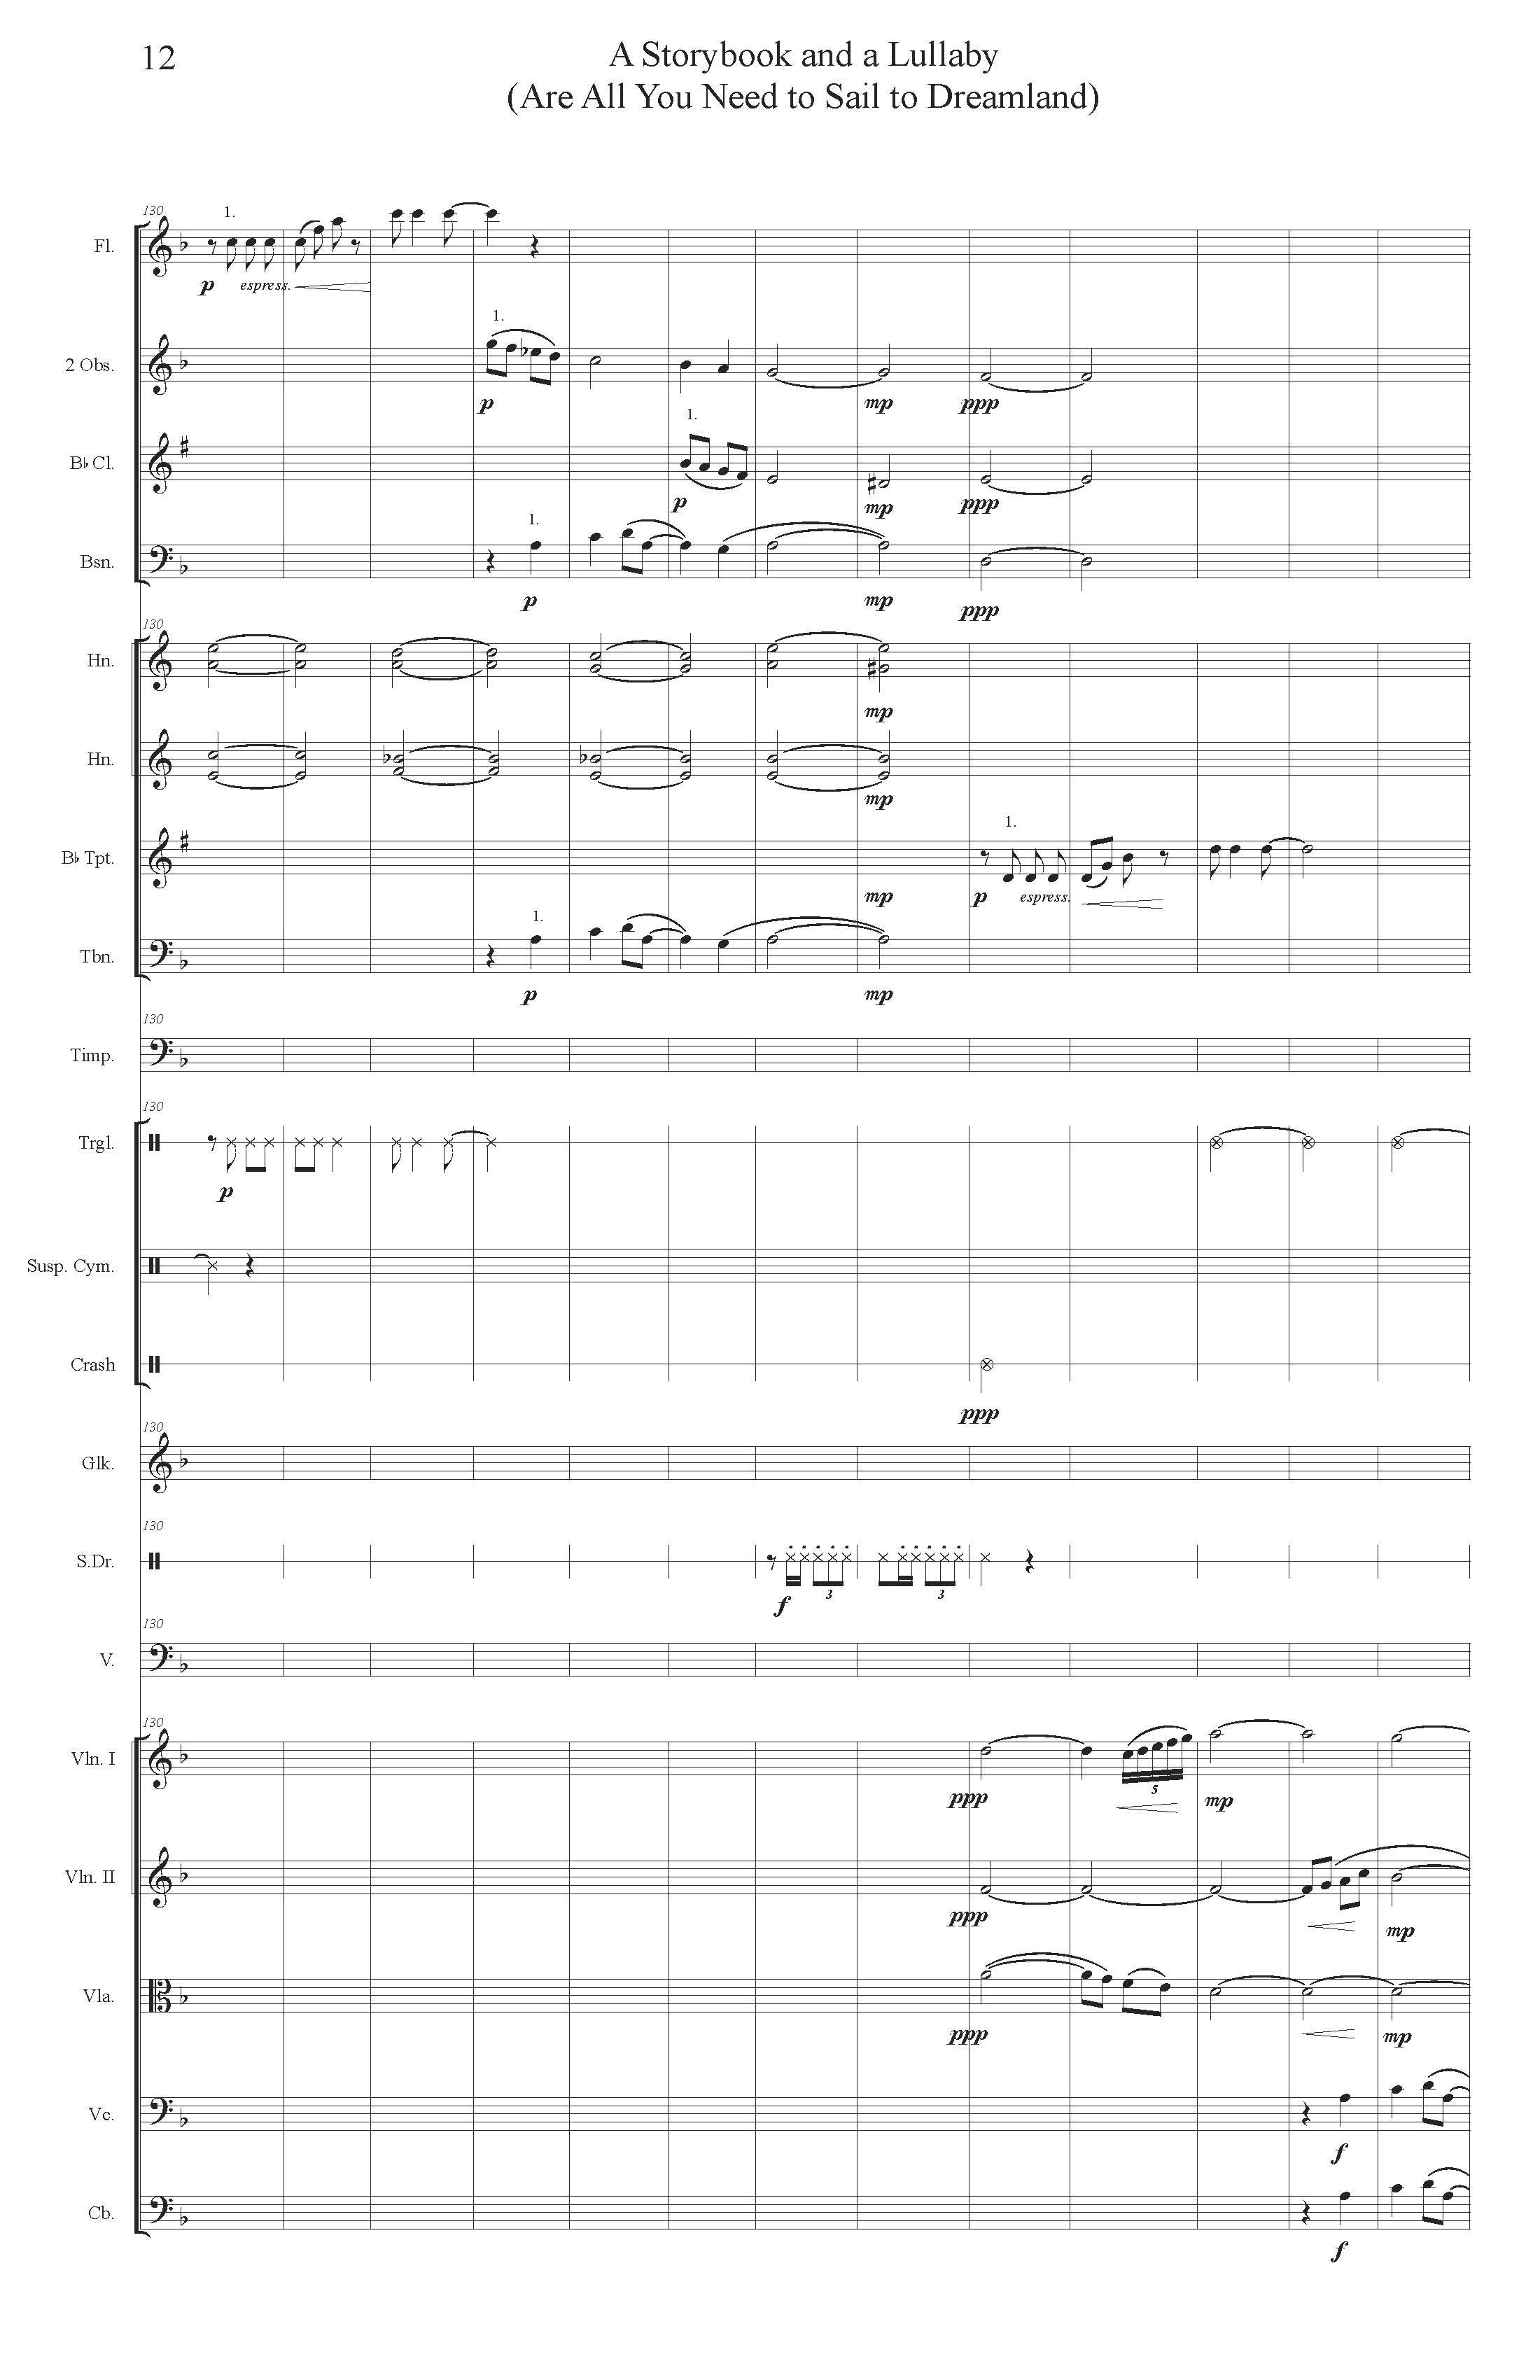 A STORYBOOK AND A LULLABY ORCH - Score_Page_12.jpg